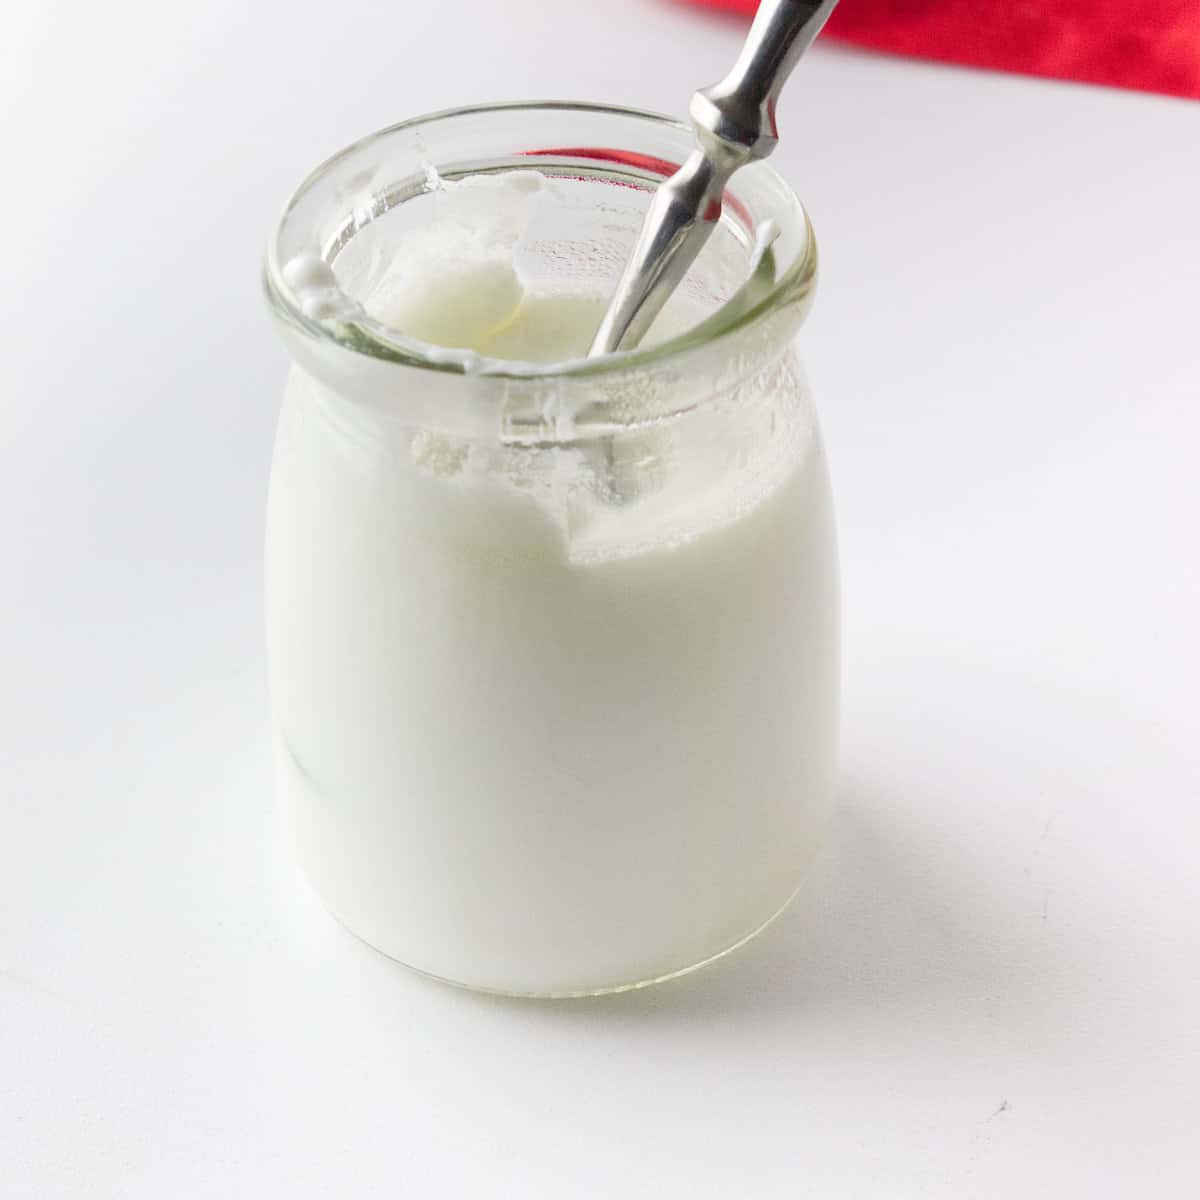 Small jar with some cultured milk and a spoon.